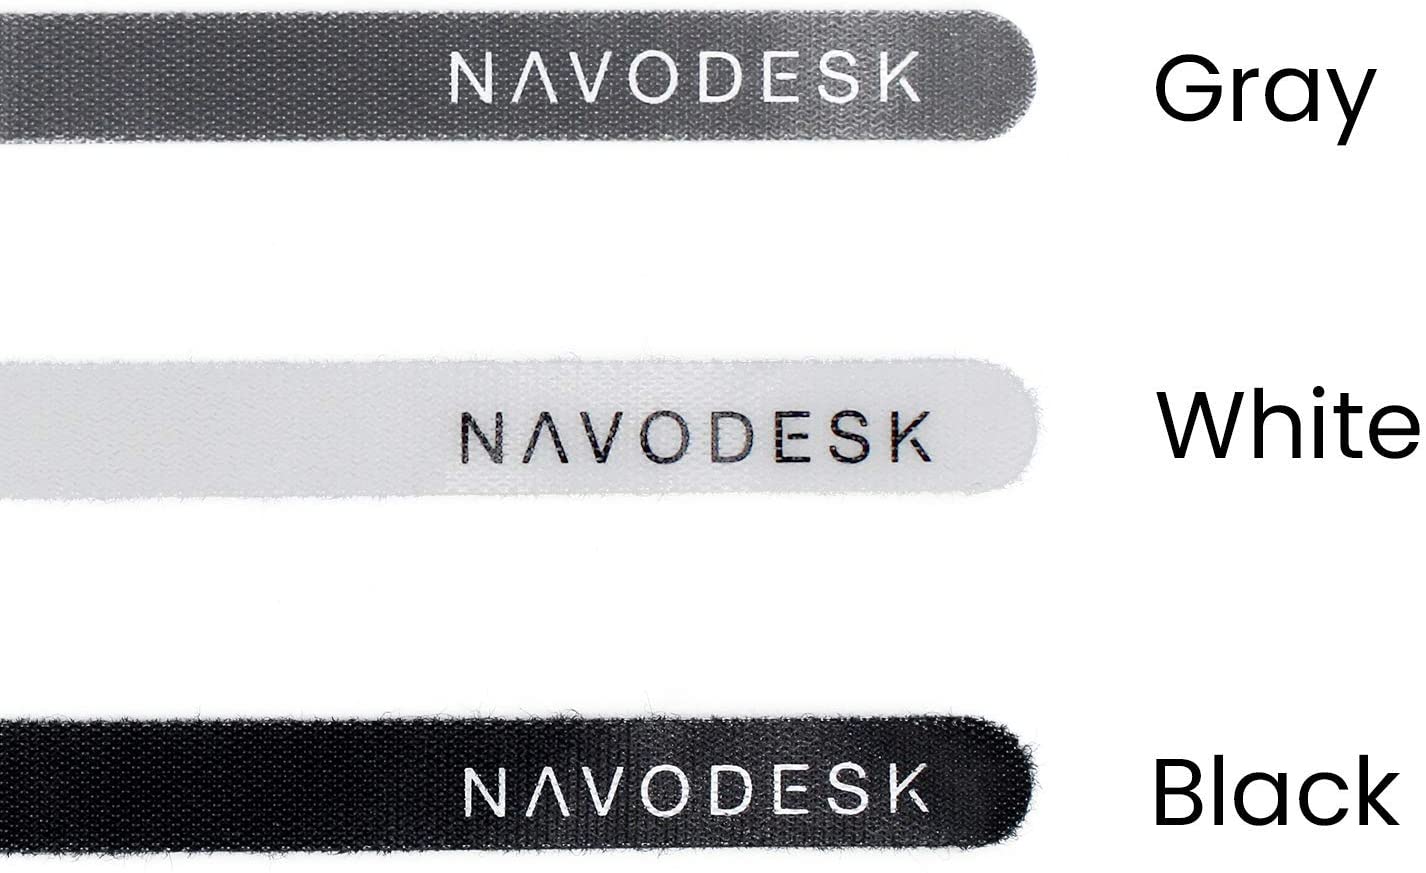 Navodesk Products Color Shades